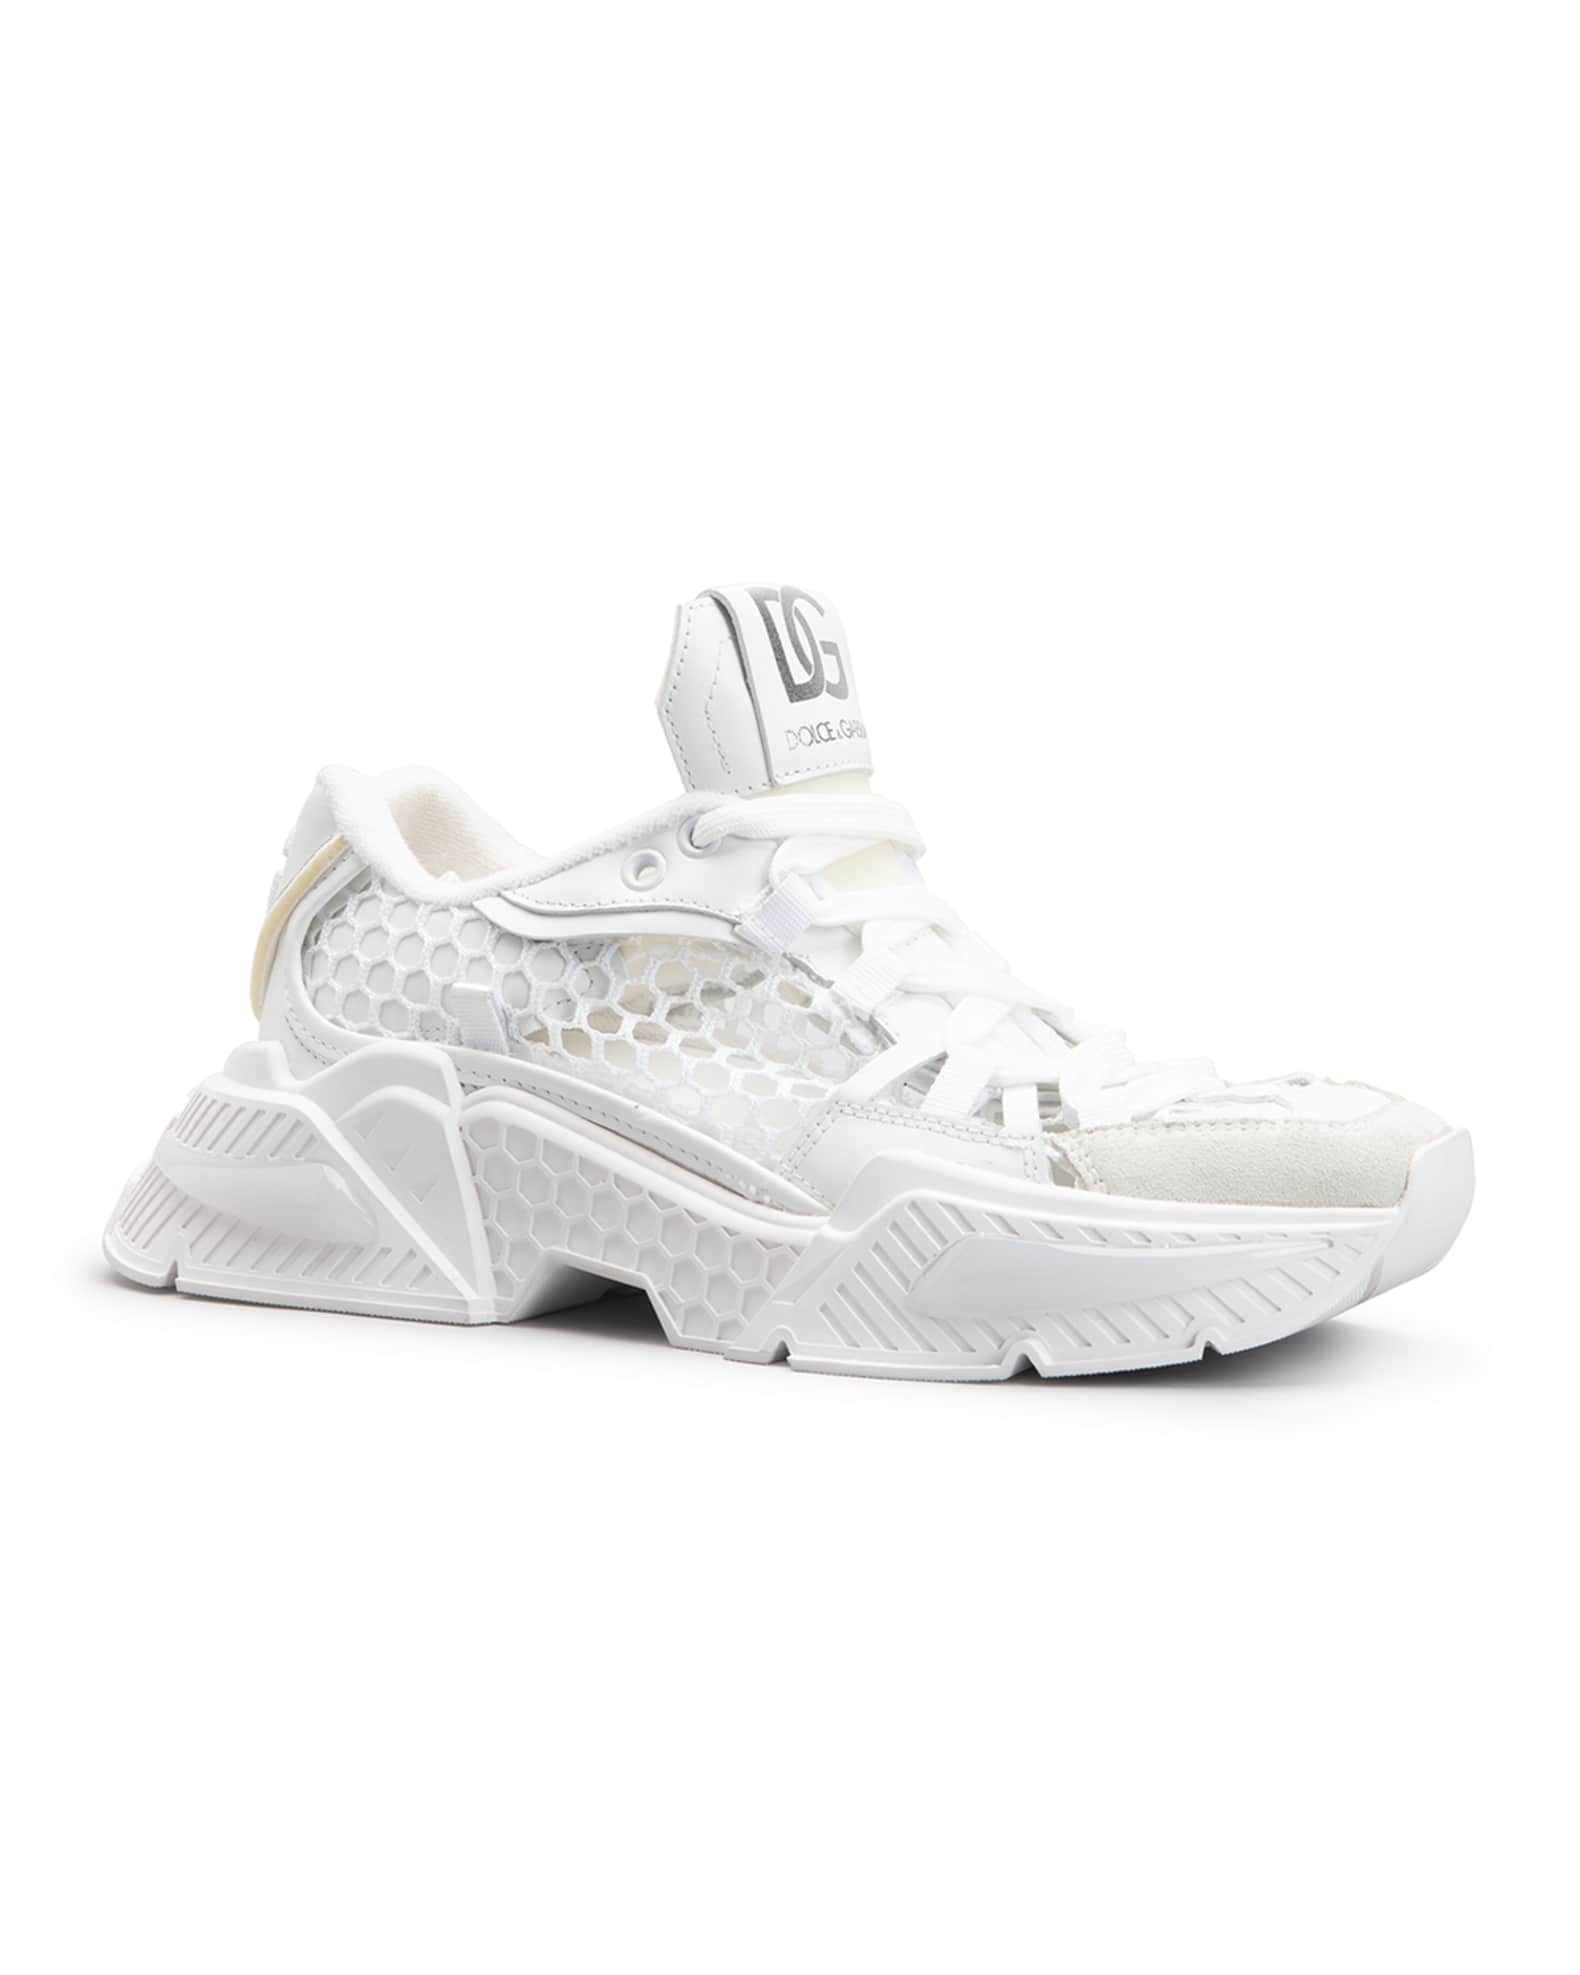 Dolce&Gabbana Air Master Net Leather Chunky Sneakers | Neiman Marcus